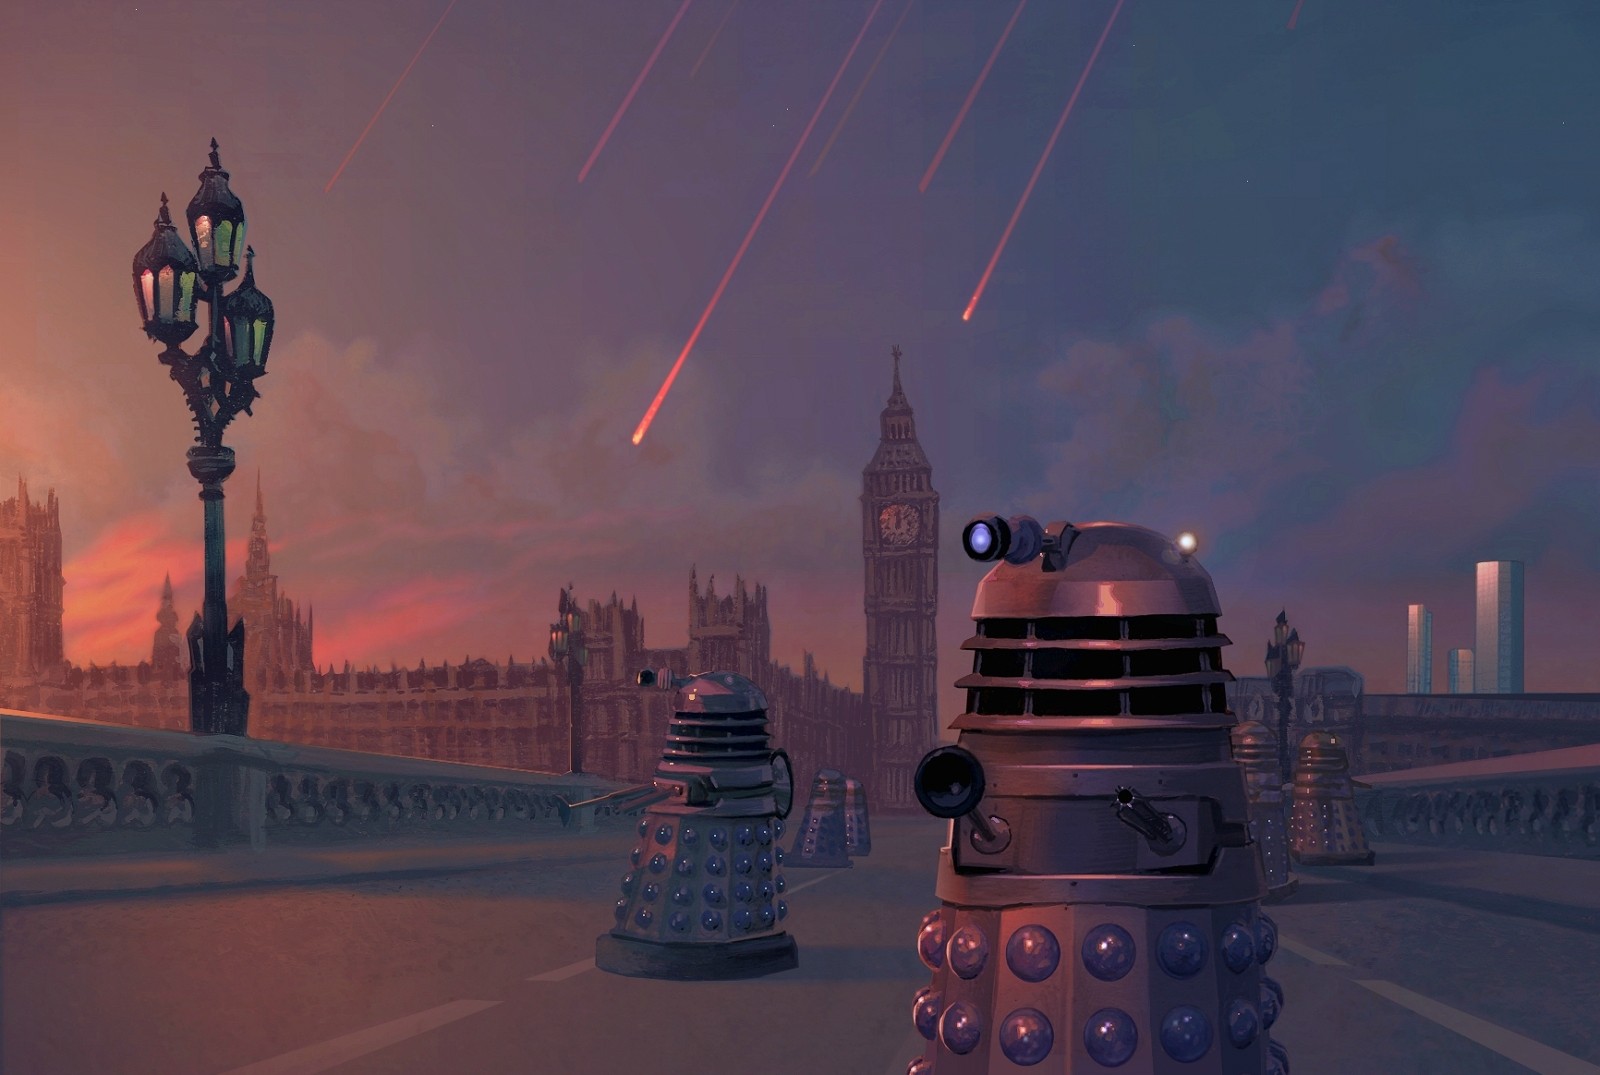 General 1600x1075 Daleks Doctor Who science fiction TV series